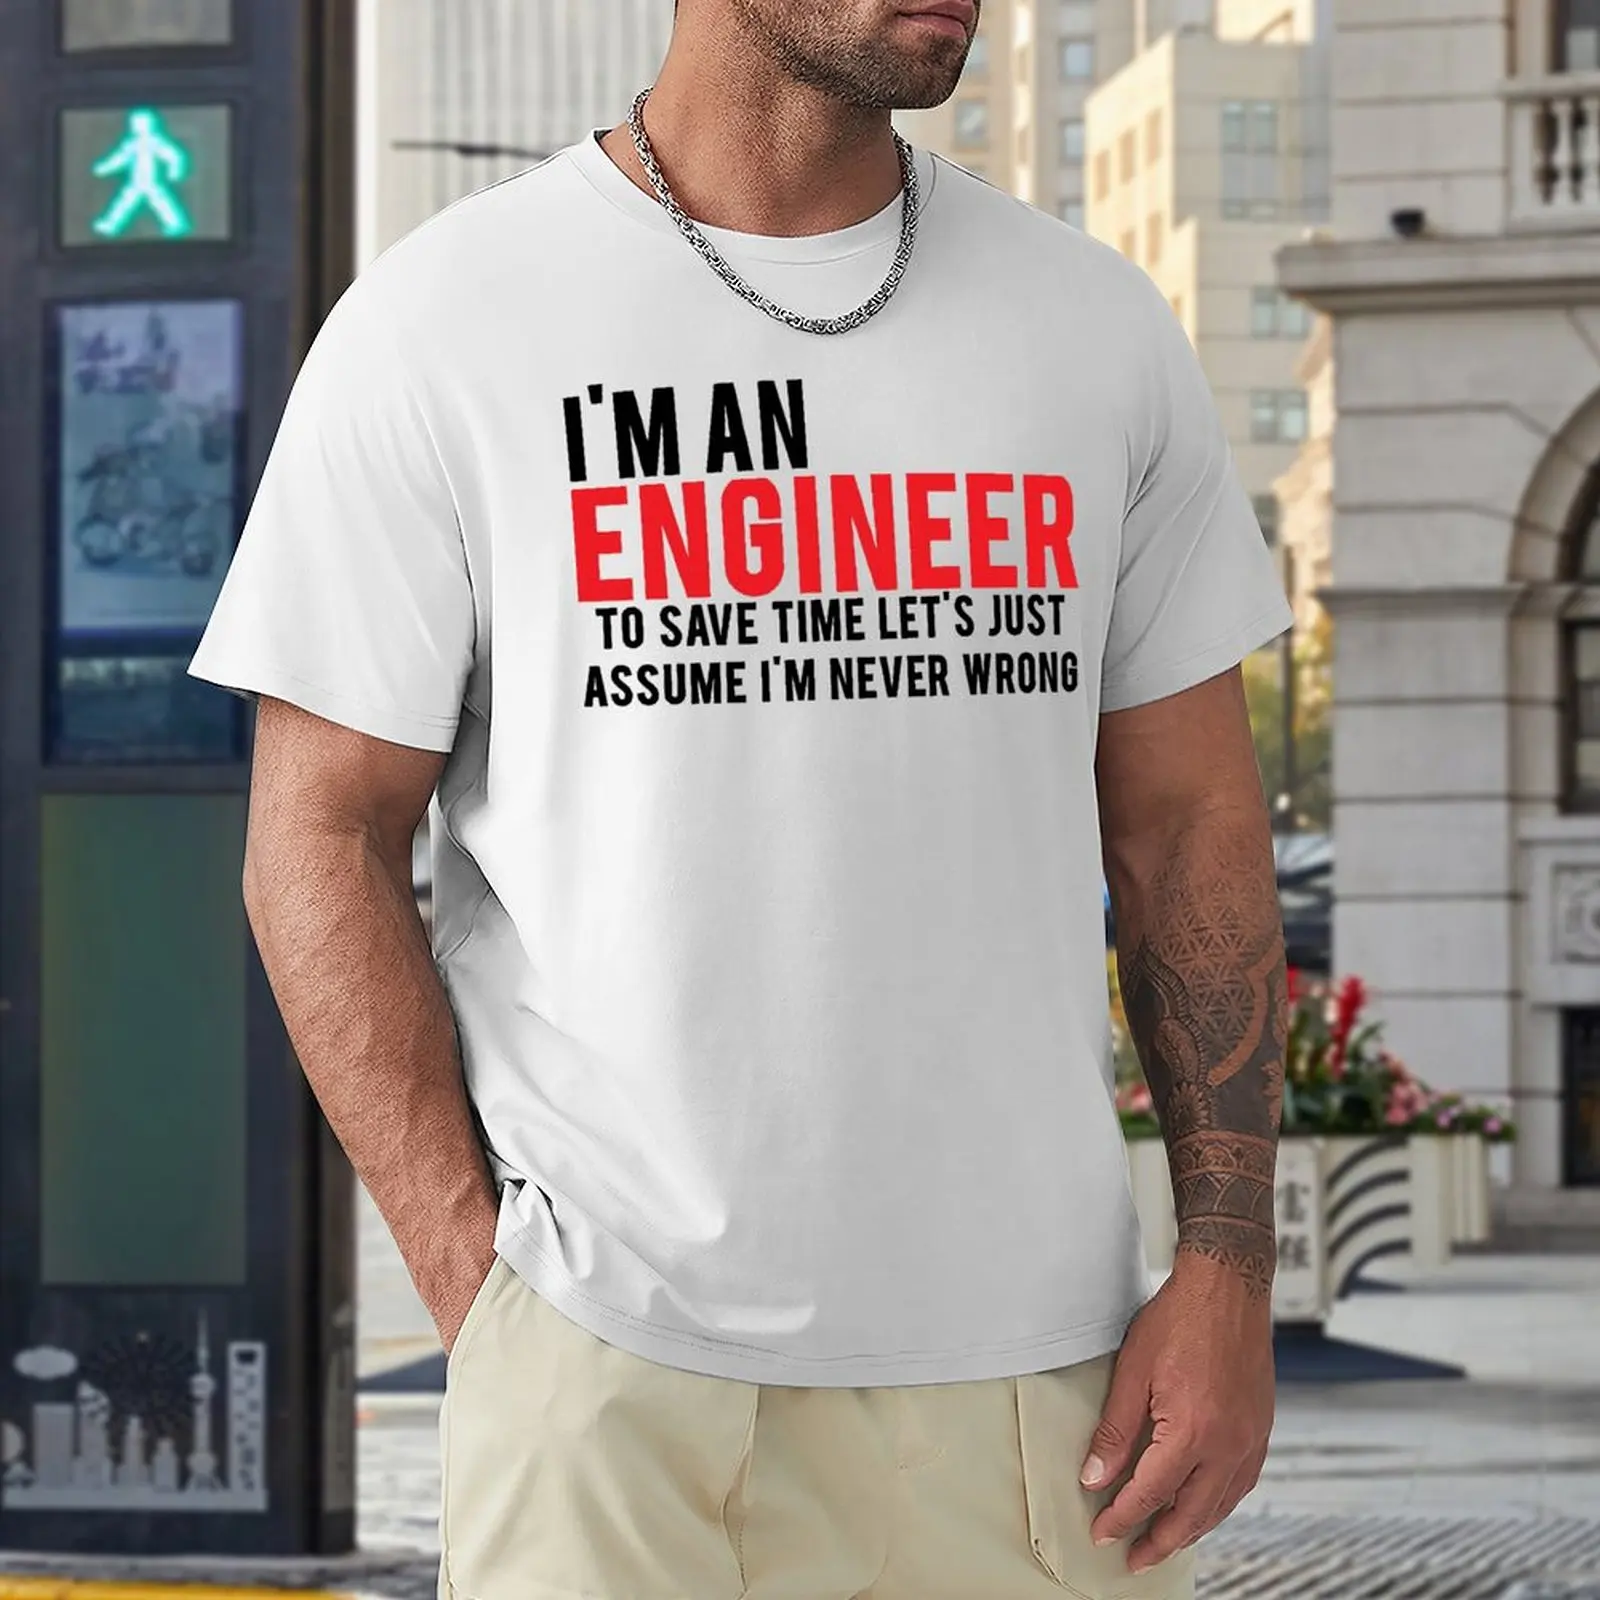 

Trust Me Im An Engineer 5 T-shirt Round Neck Motion Humor Graphic Tees Funny Graphic Aactivity Competition USA Size